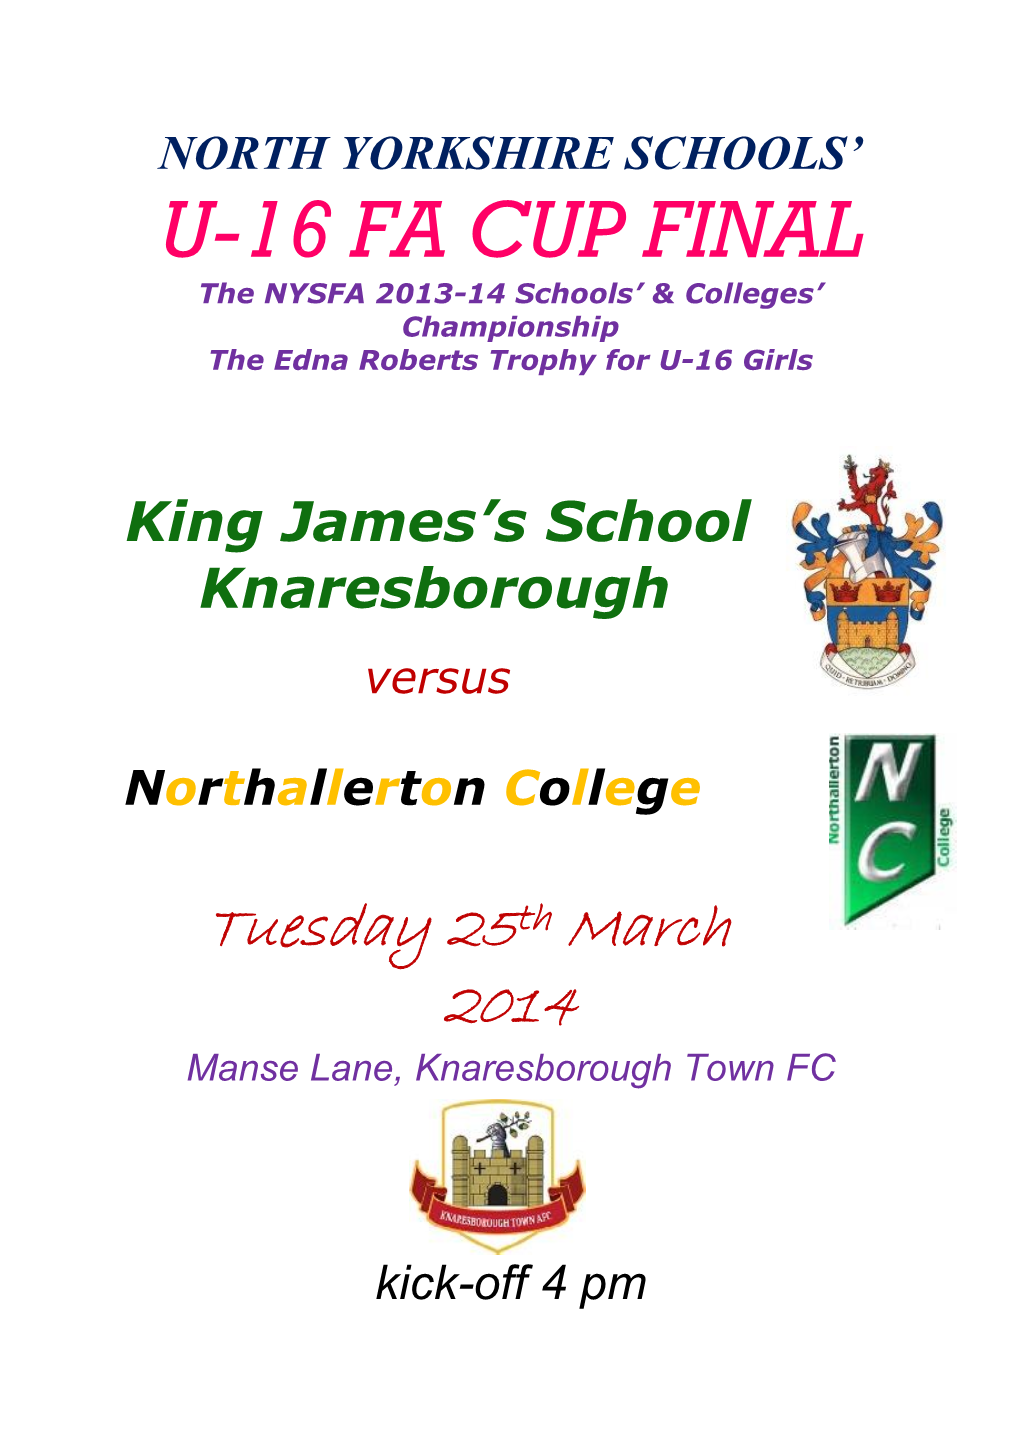 U-16 FA CUP FINAL the NYSFA 2013-14 Schools’ & Colleges’ Championship the Edna Roberts Trophy for U-16 Girls